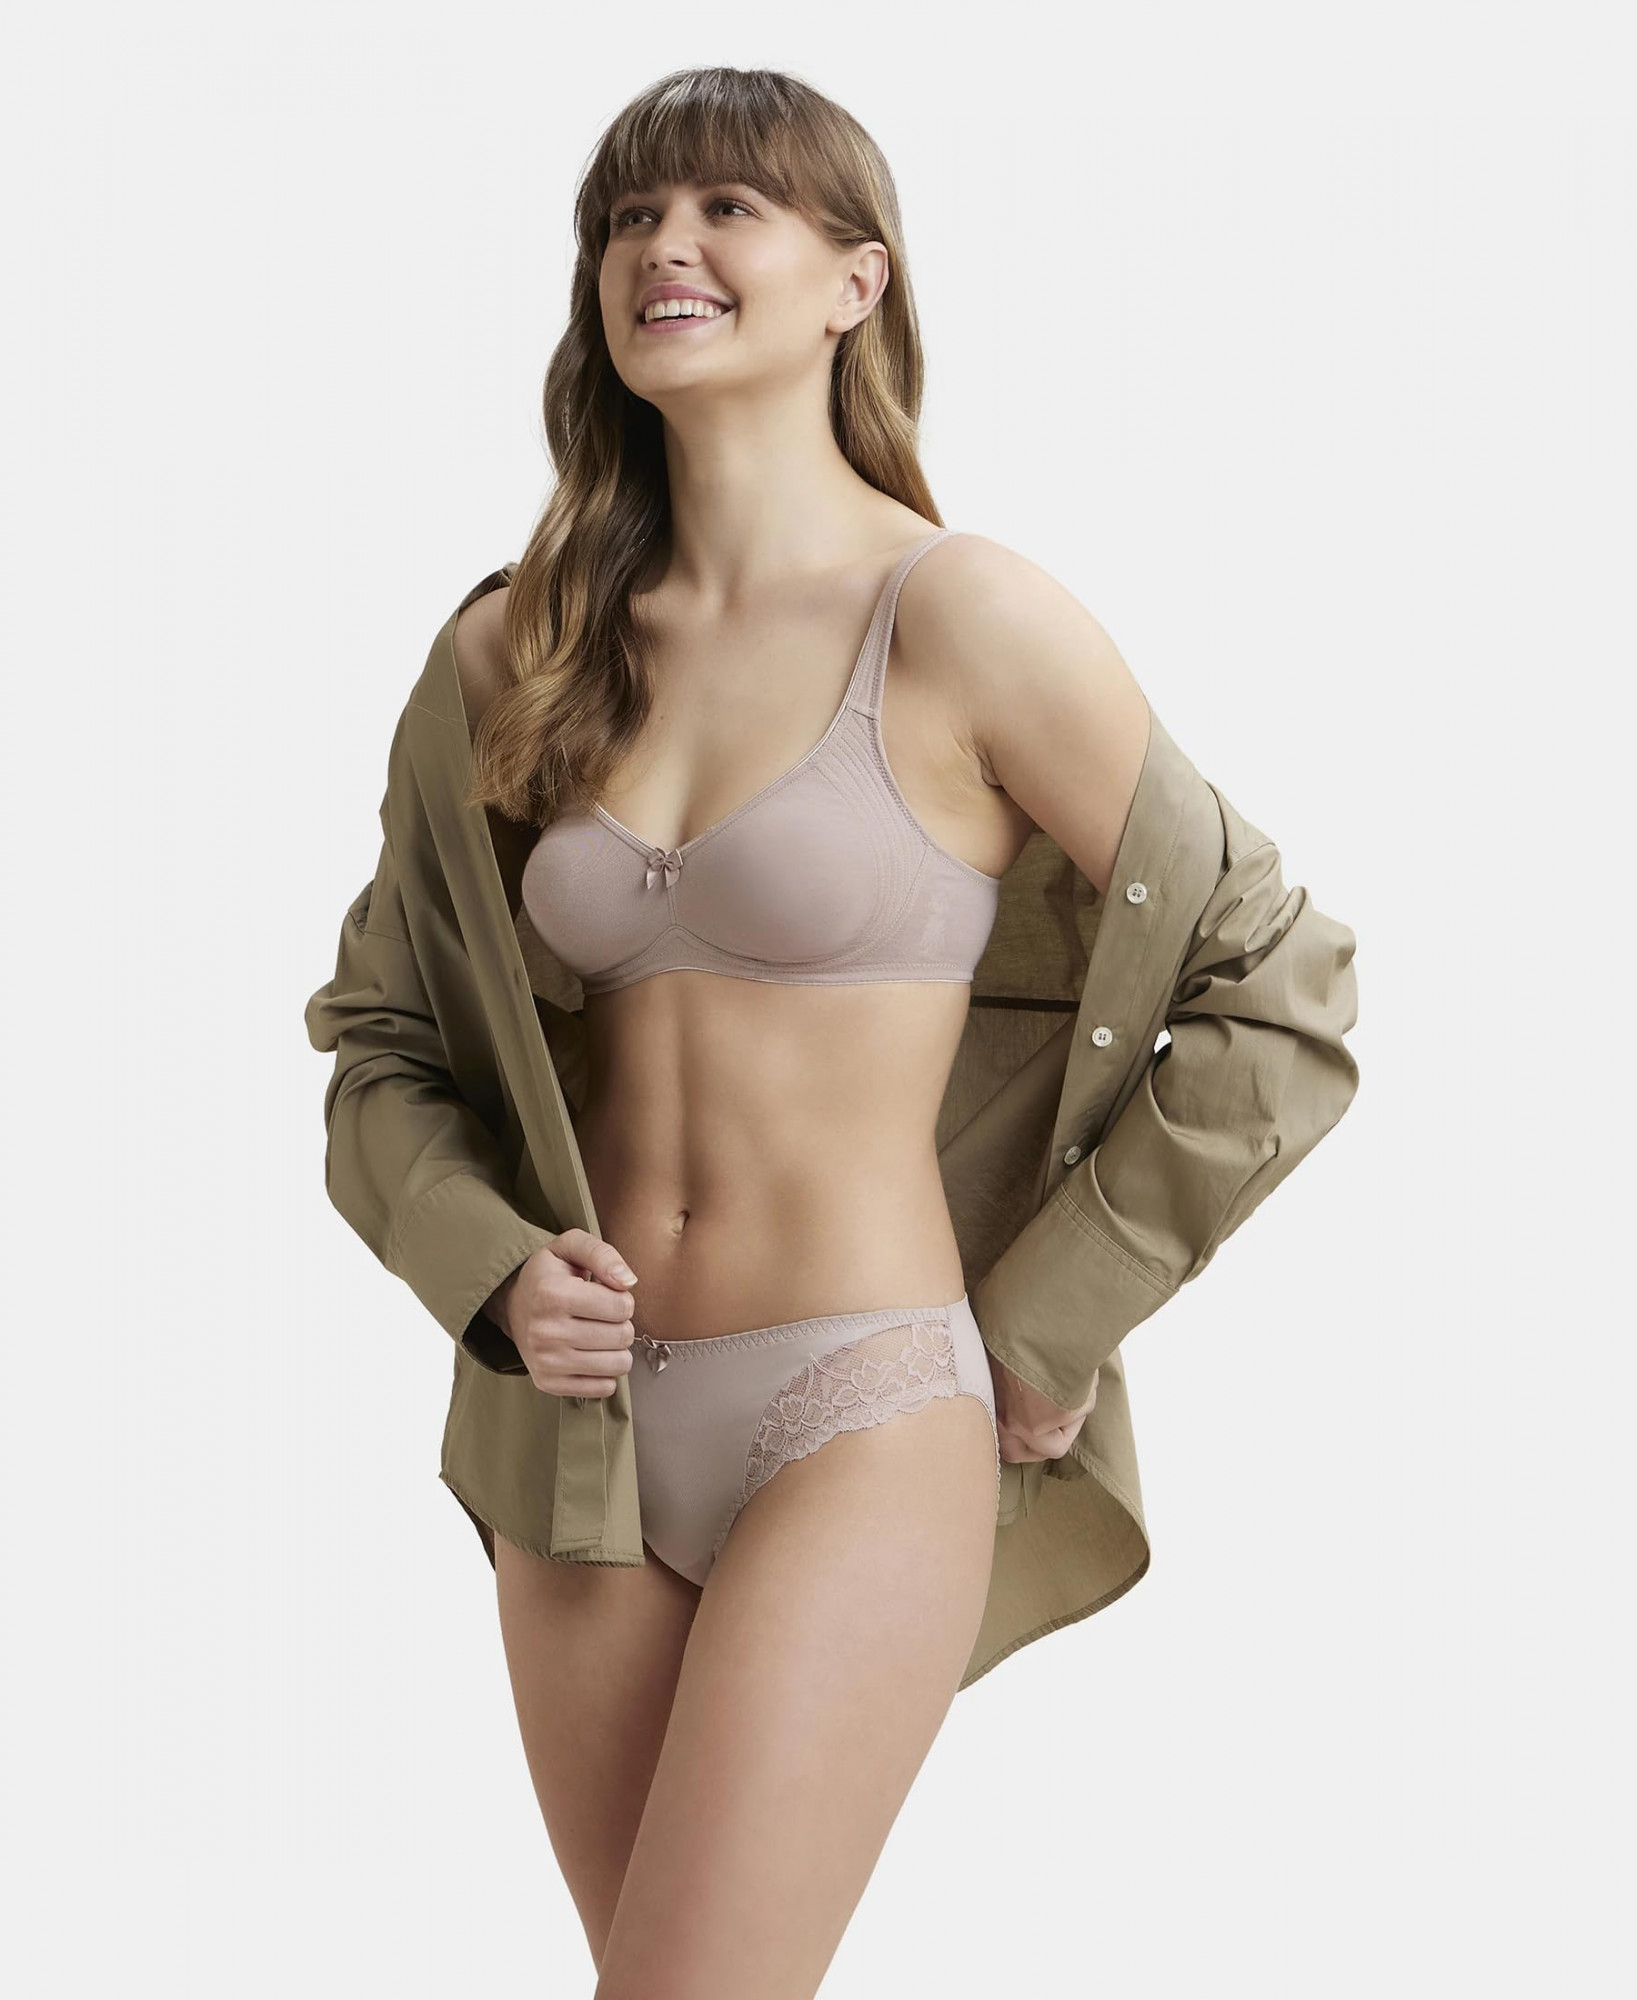 https://www.fastemi.com/uploads/fastemicom/products/jockey-1250-womenamp039s-wirefree-non-padded-super-combed-cotton-elastane-stretch-full-coverage-everyday-bra-with-contoured-shaper-panel-and-adjustable-strapsmocha32b-129678131019005_l.jpg